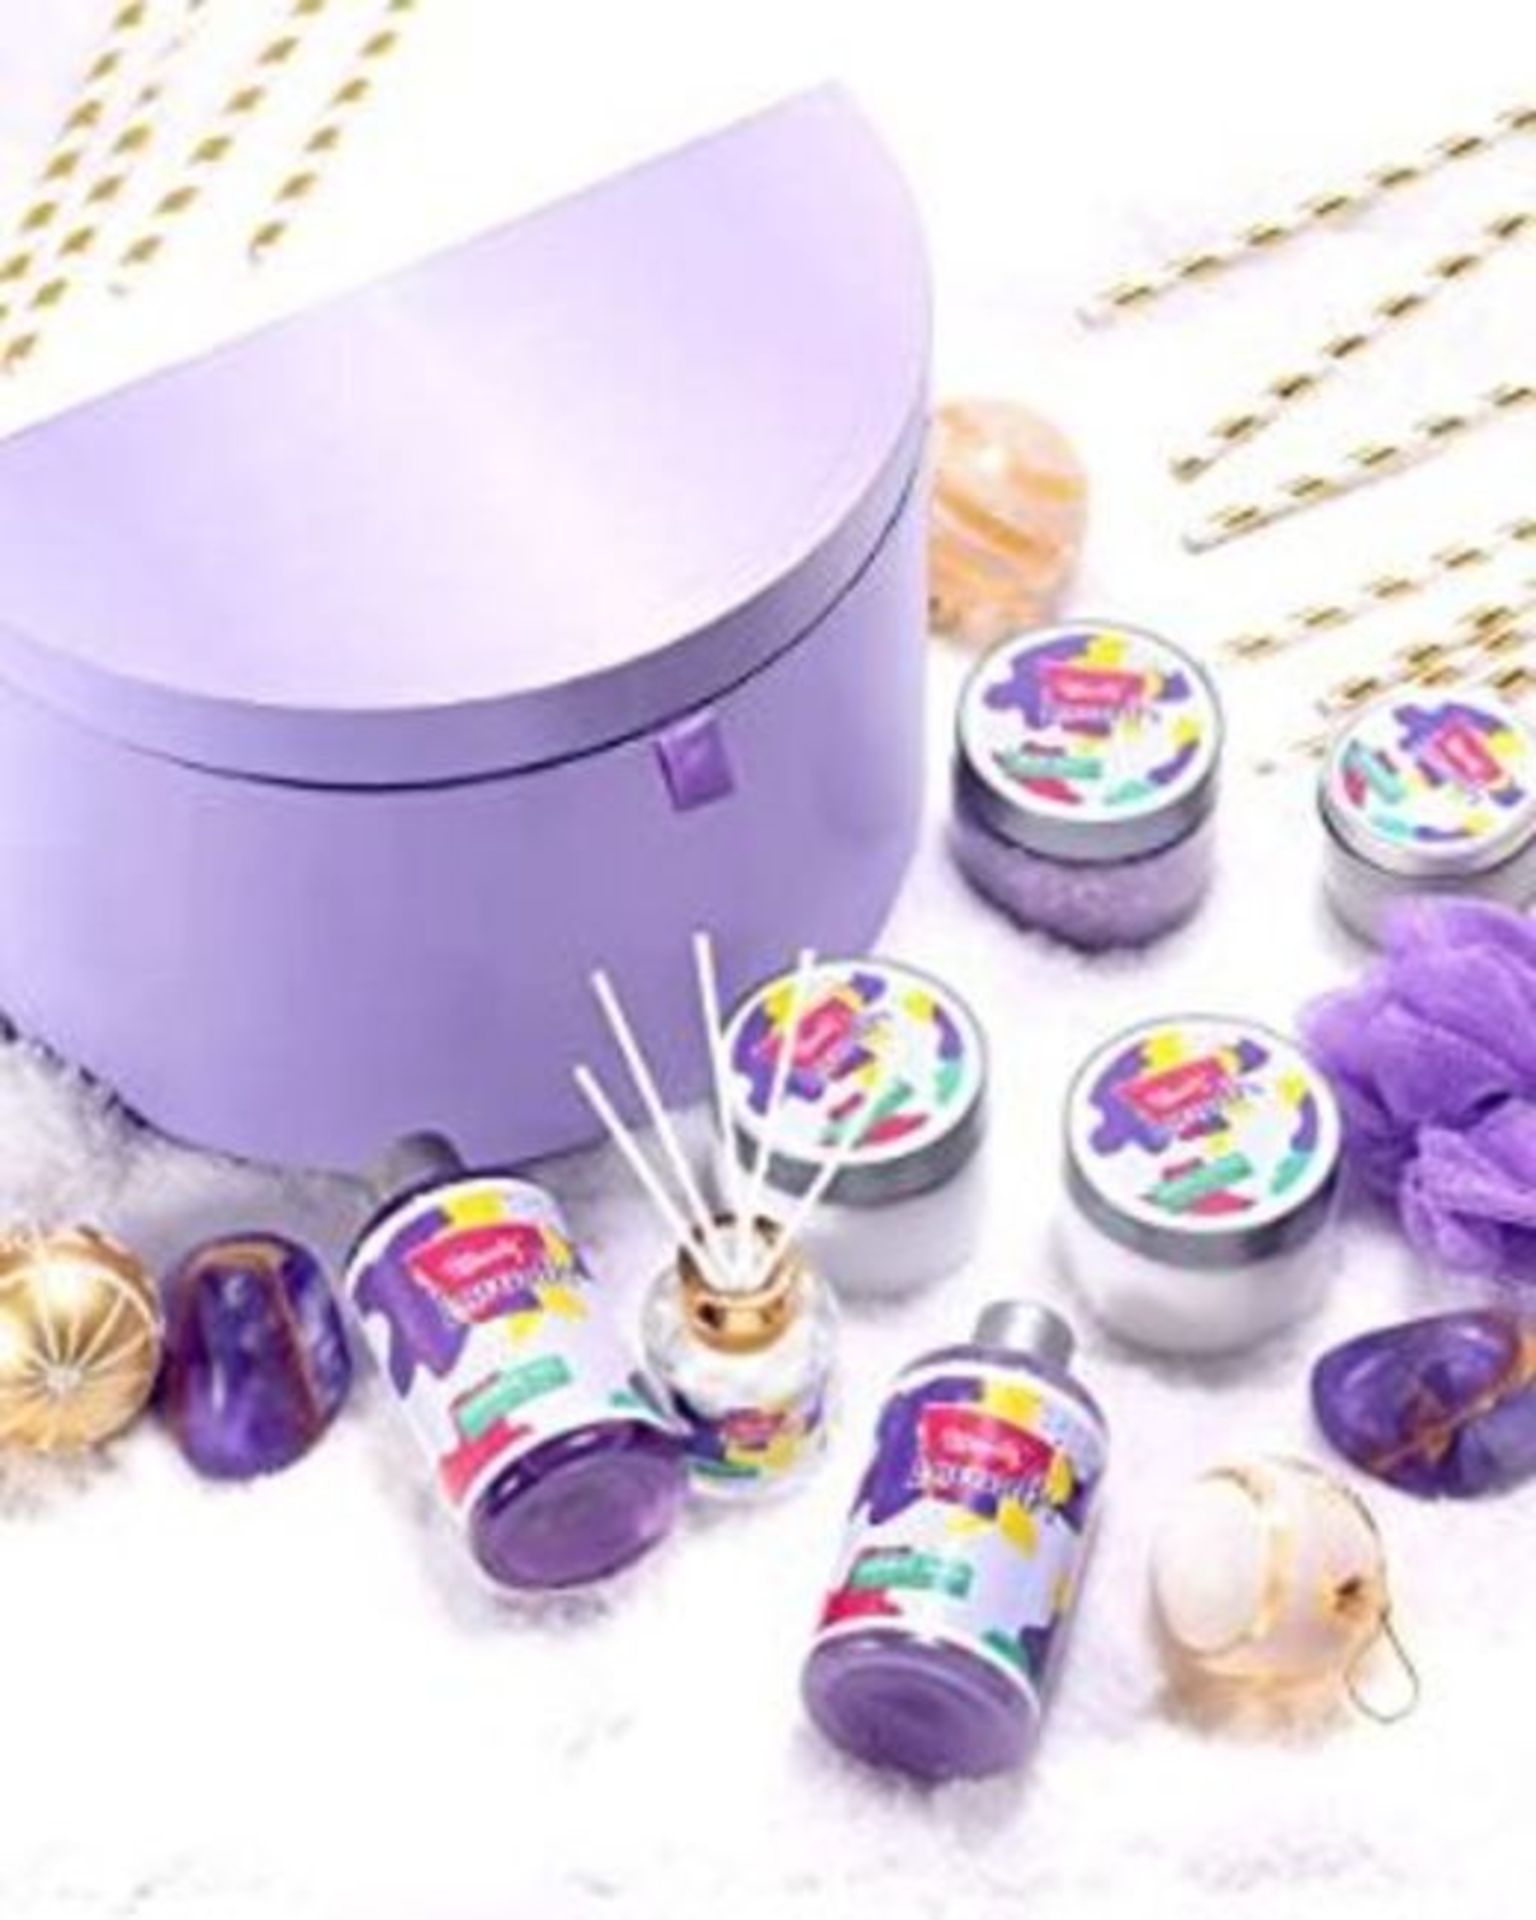 New Packaged Lavender Bath & Shower Jewellery Box. RRP £44.99 Each. 10Pcs - Image 2 of 2